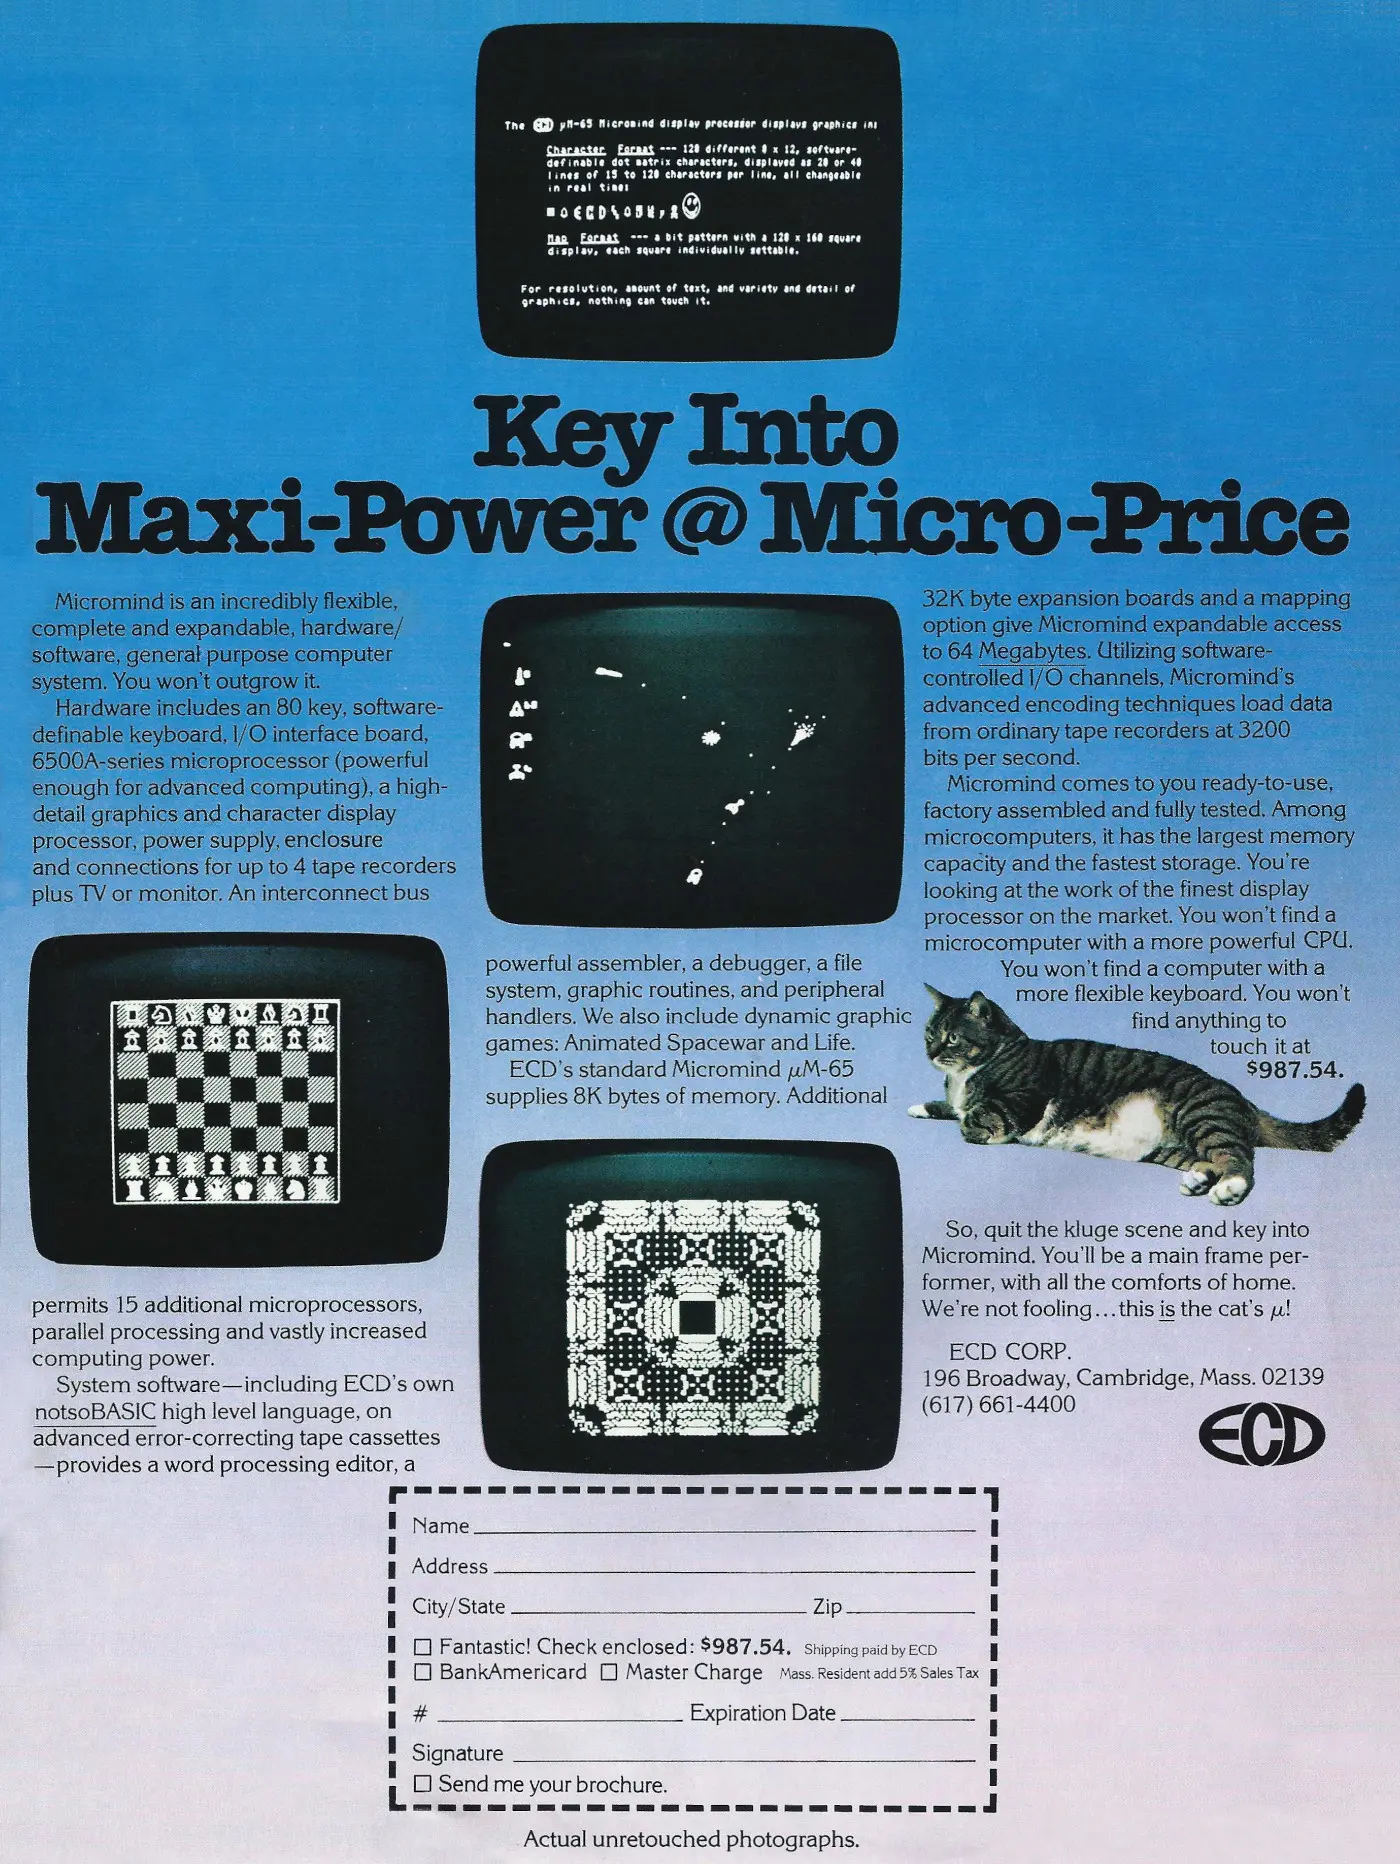 ECD Advert: Key into Maxi-power @ Micro-price, from Byte - The Small Systems Journal, August 1977